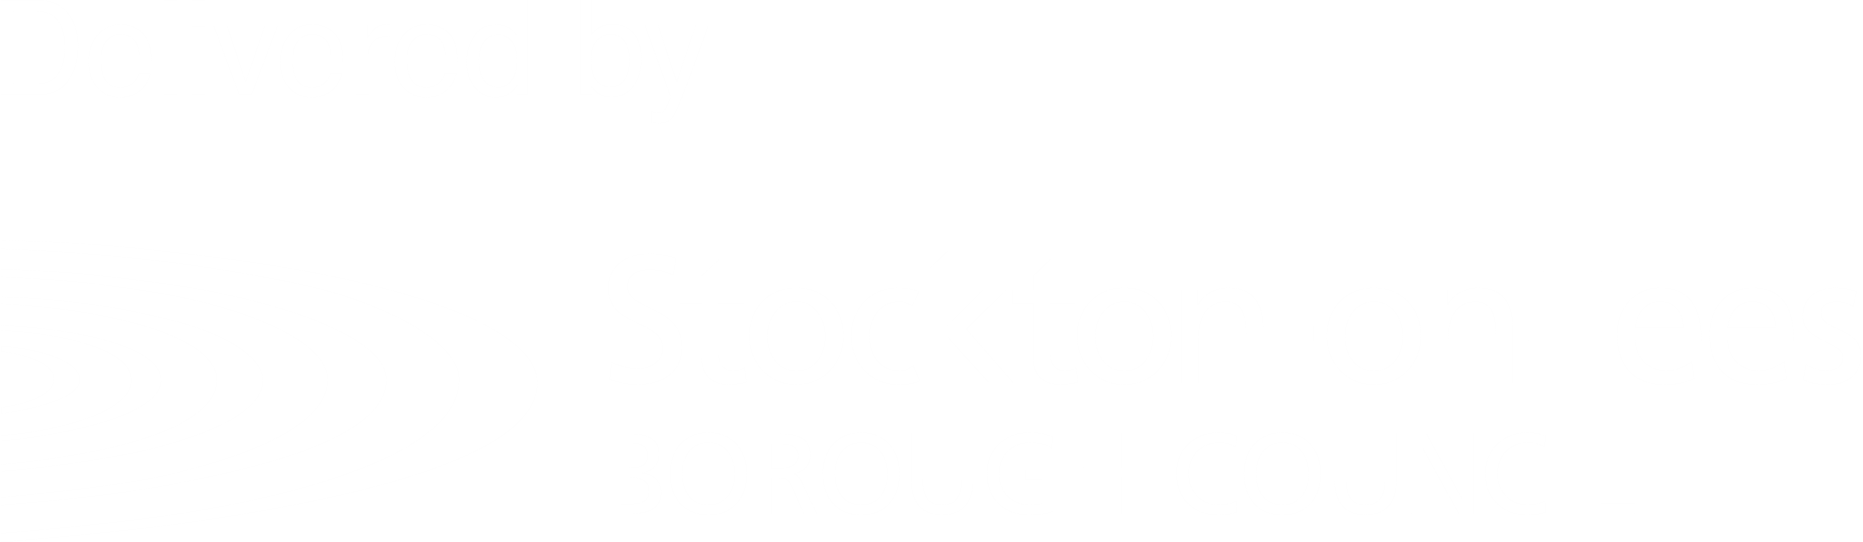 Delivered By Stockton On Tees Borough Council Logo